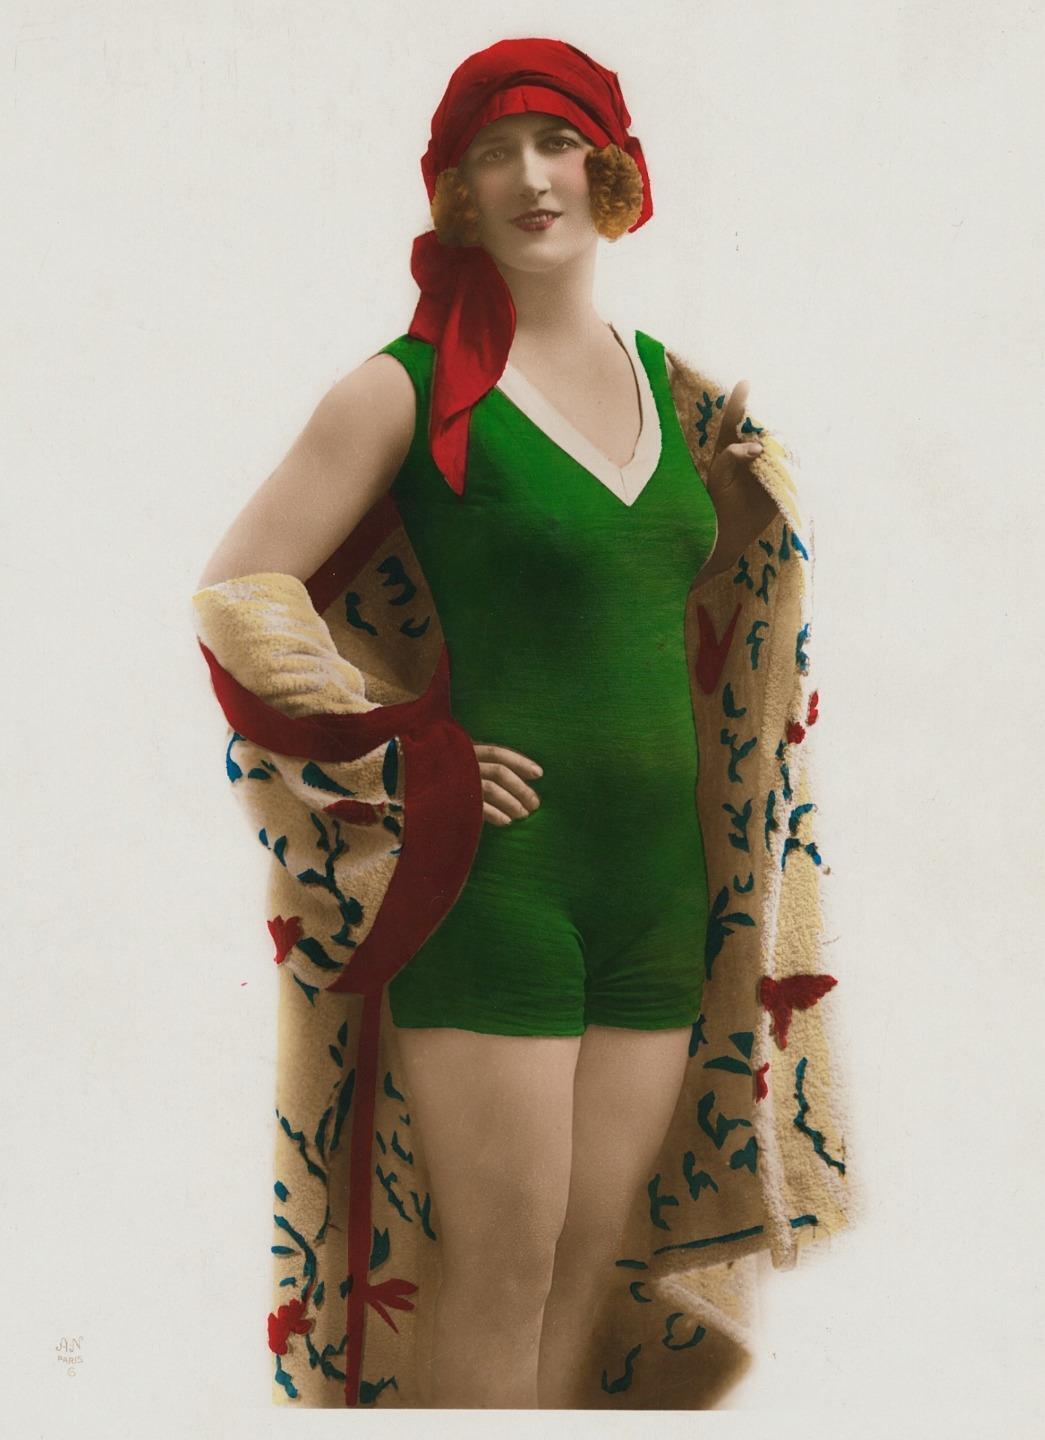 BEAUTIFUL c. 1920's Woman in Bathing Suit Hand-Colored Photograph